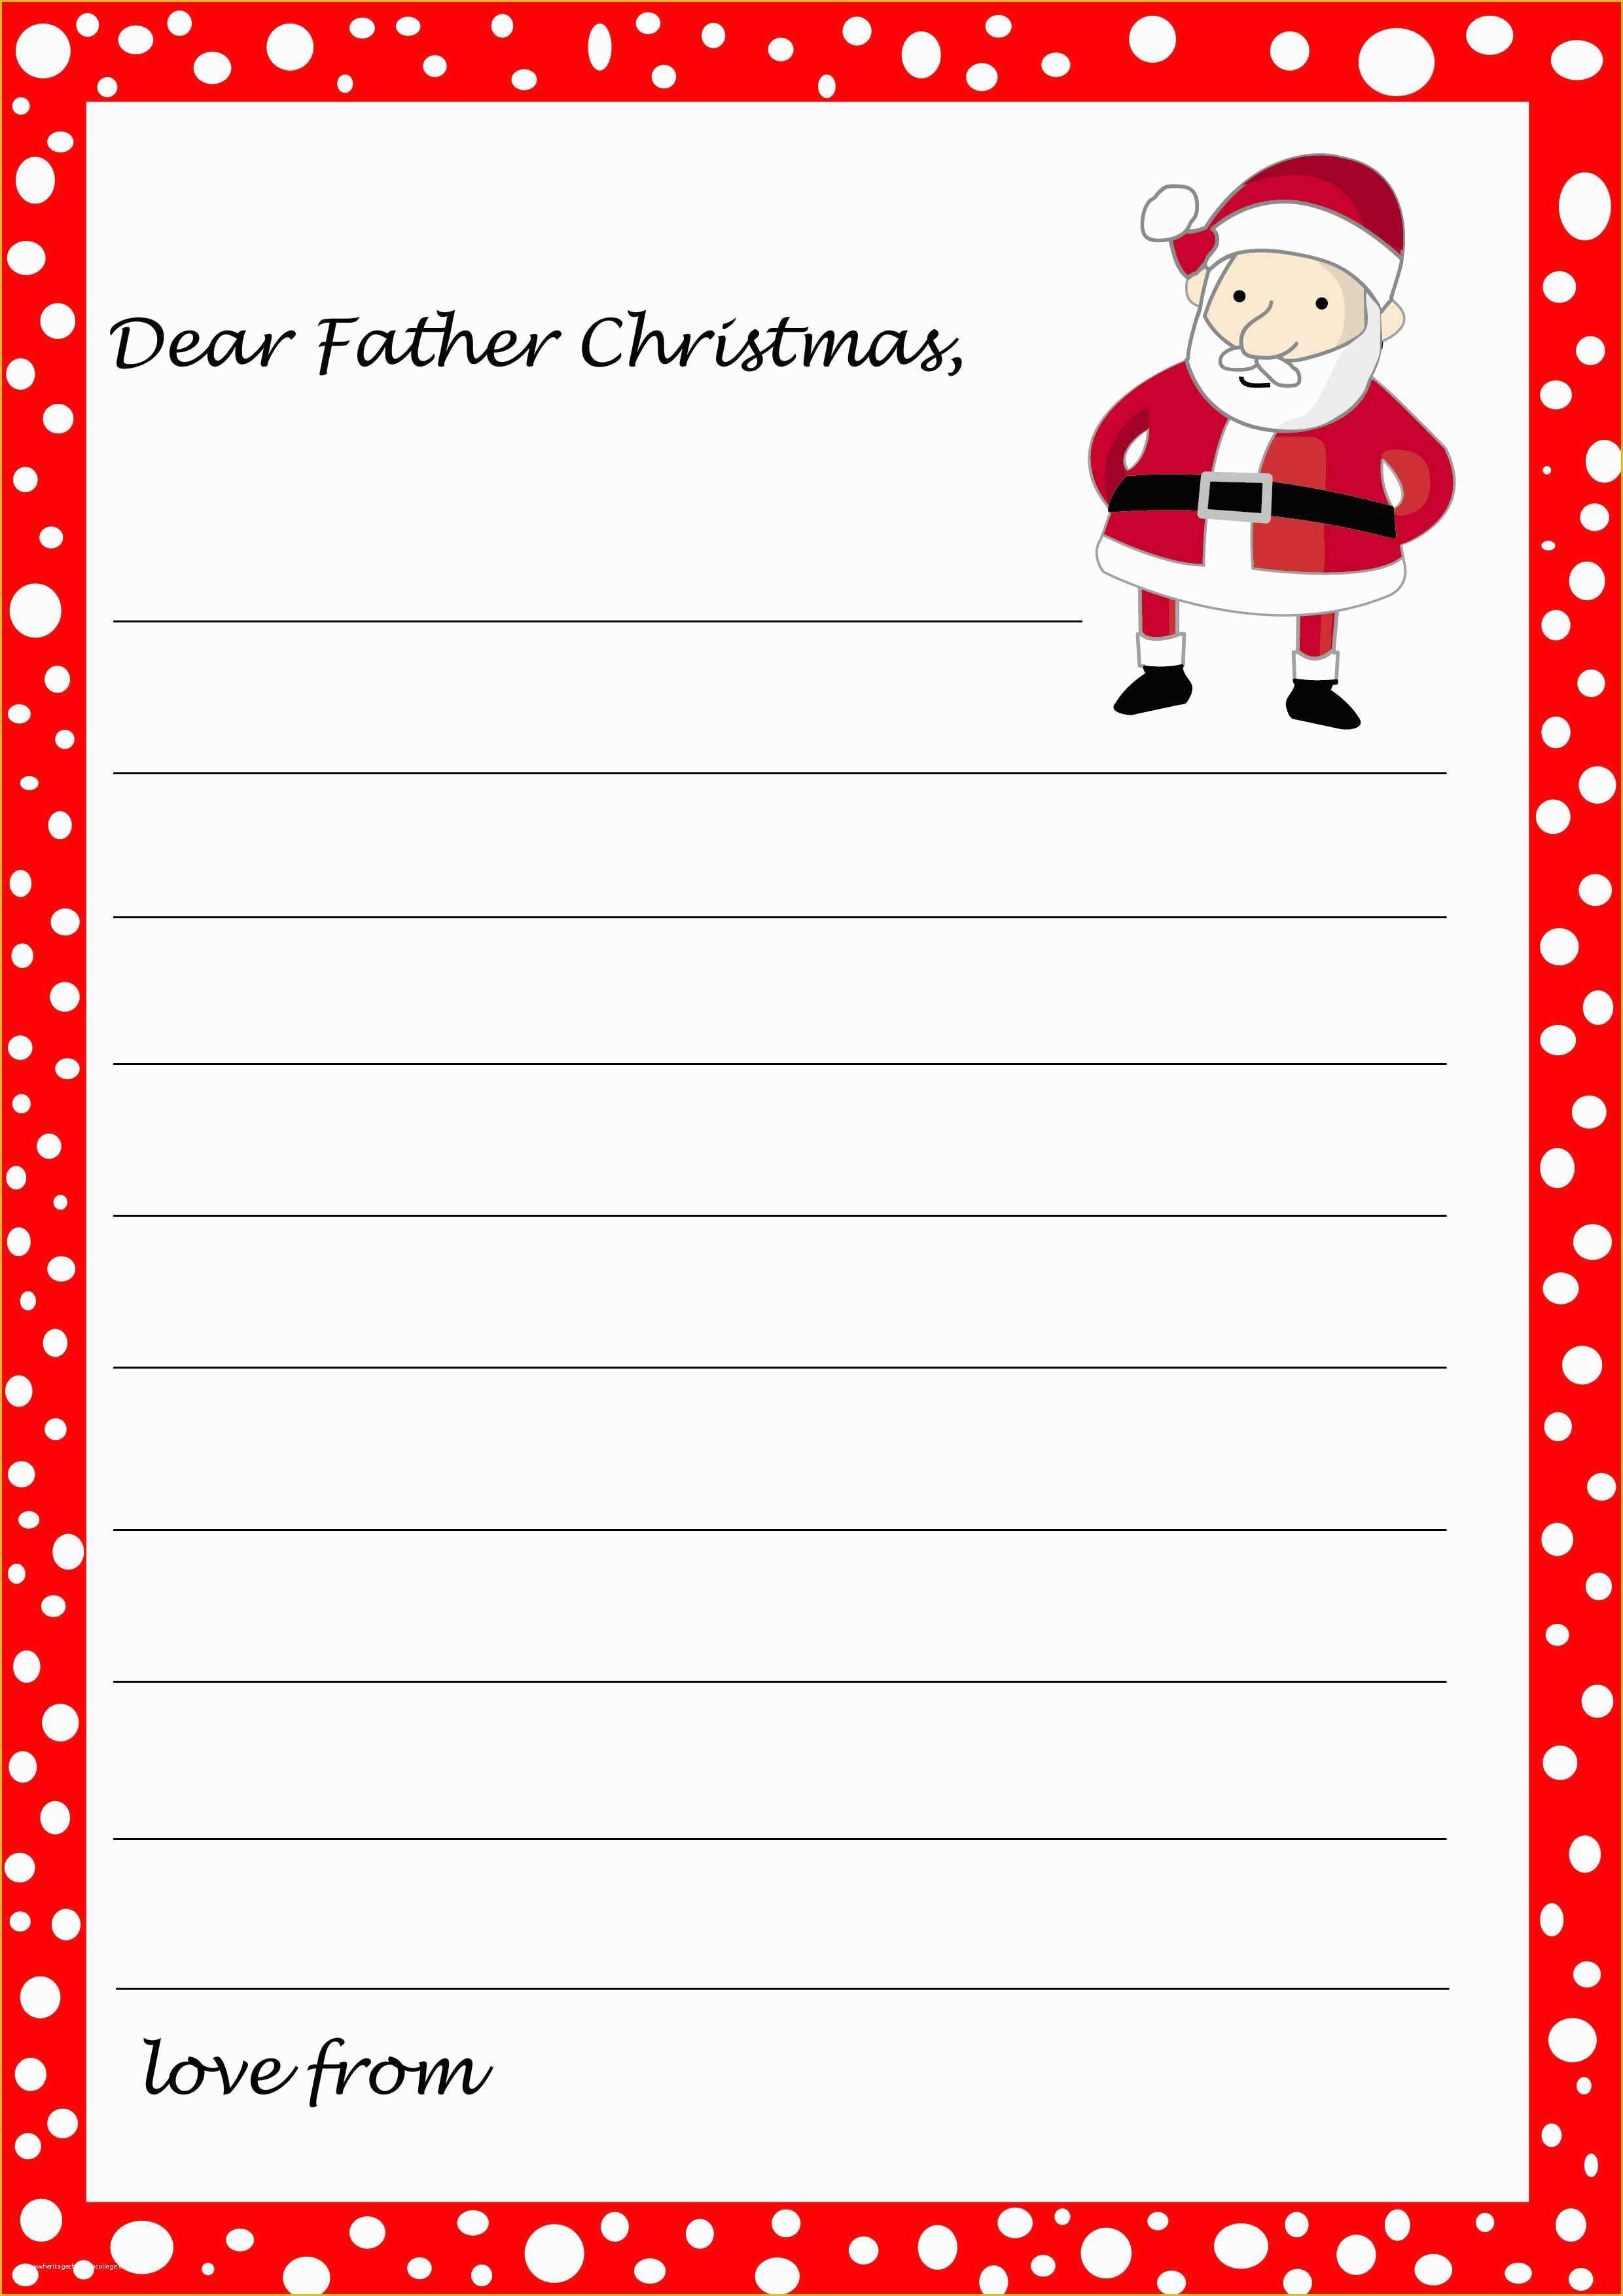 Free Christmas Letter Templates Of Template Letter to Santa